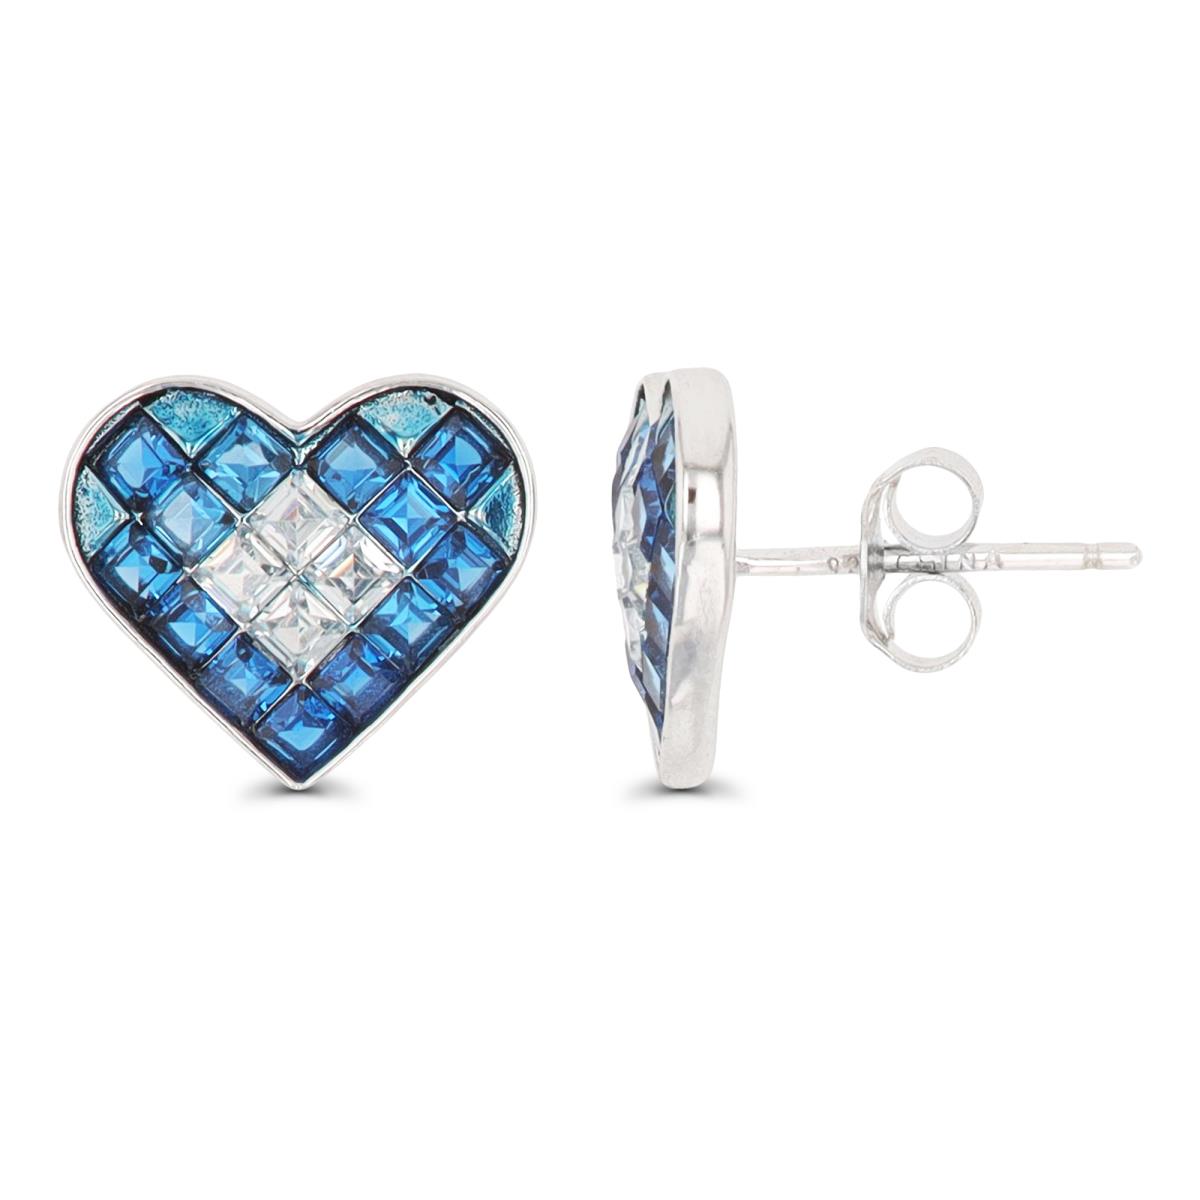 Sterling Silver Rhodium Square #113 Blue Spinel & White CZ Heart Stud Earring